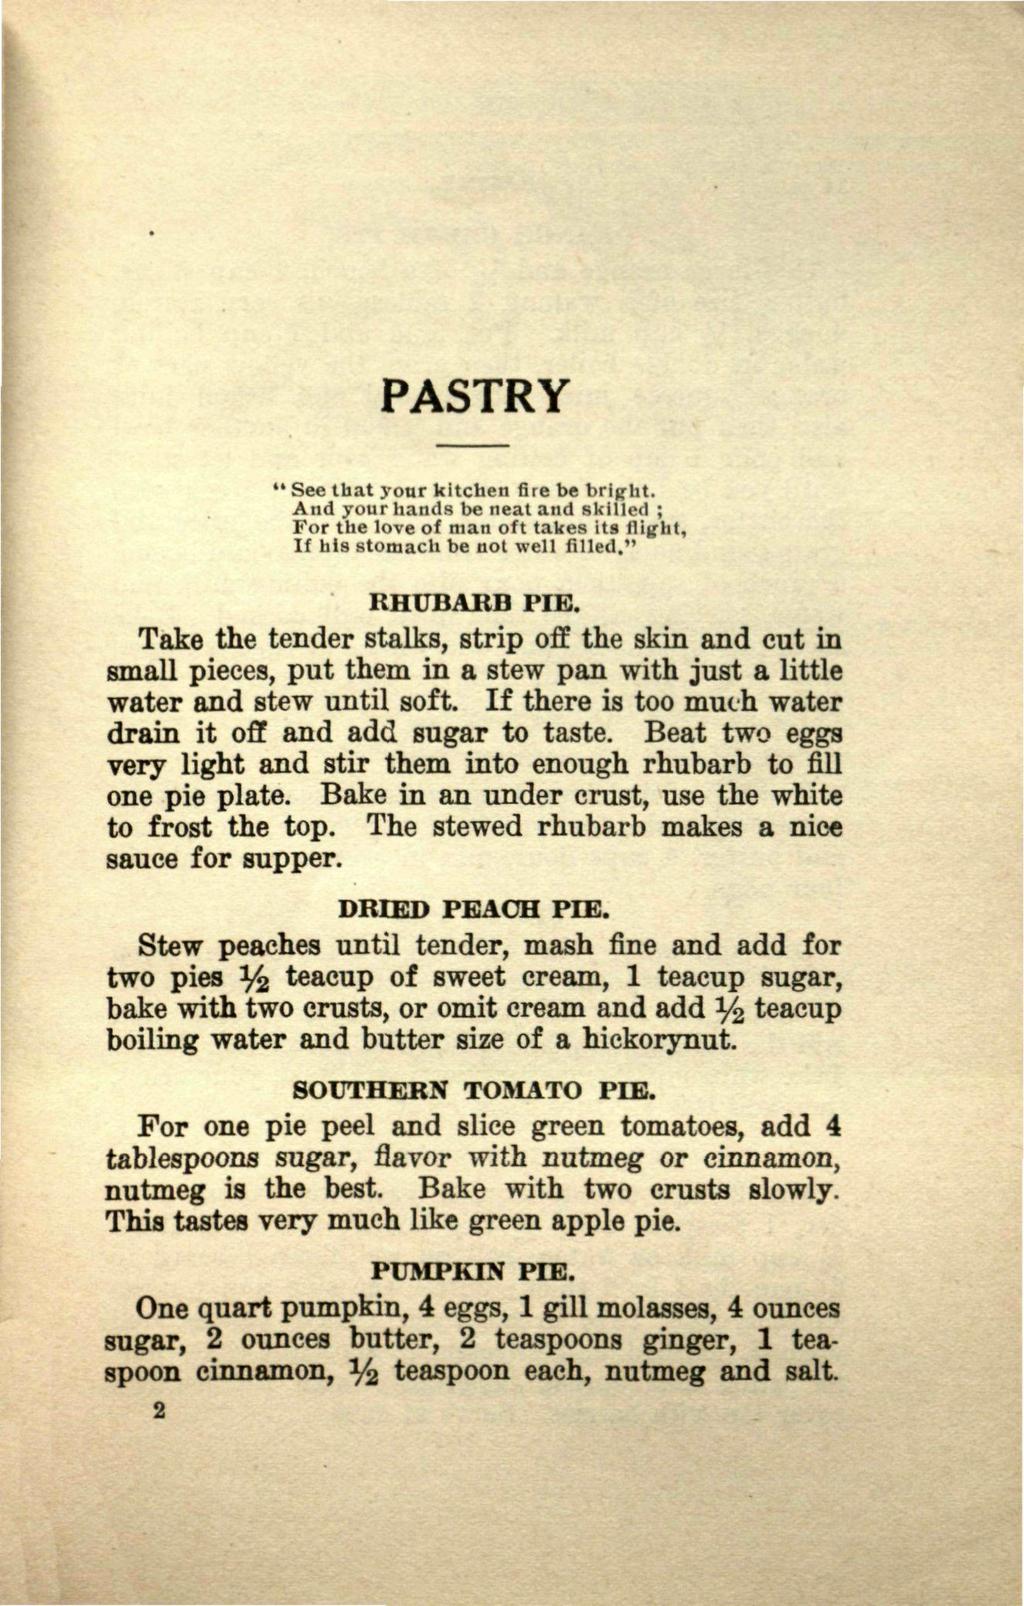 PASTRY *' See that your kitchen fire be bright. And your hands be neat and skilled ; For the love of man oft takes its flight, If his stomach be not well filled. M RHUBARB PIE.